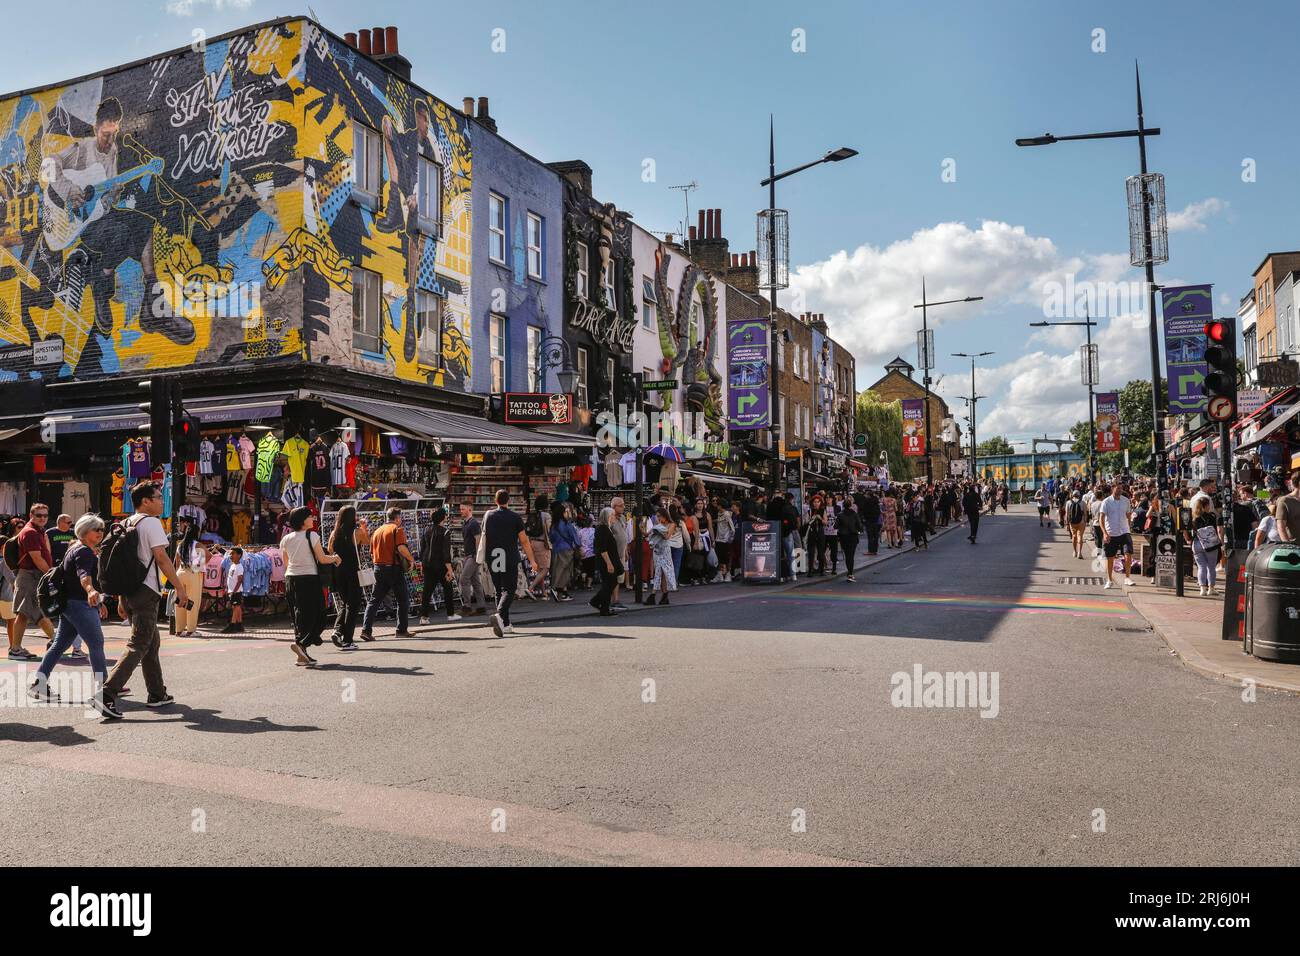 Tourists, visitors, people shopping in crowded Camden High Street, Camden Town, London, England, UK Stock Photo